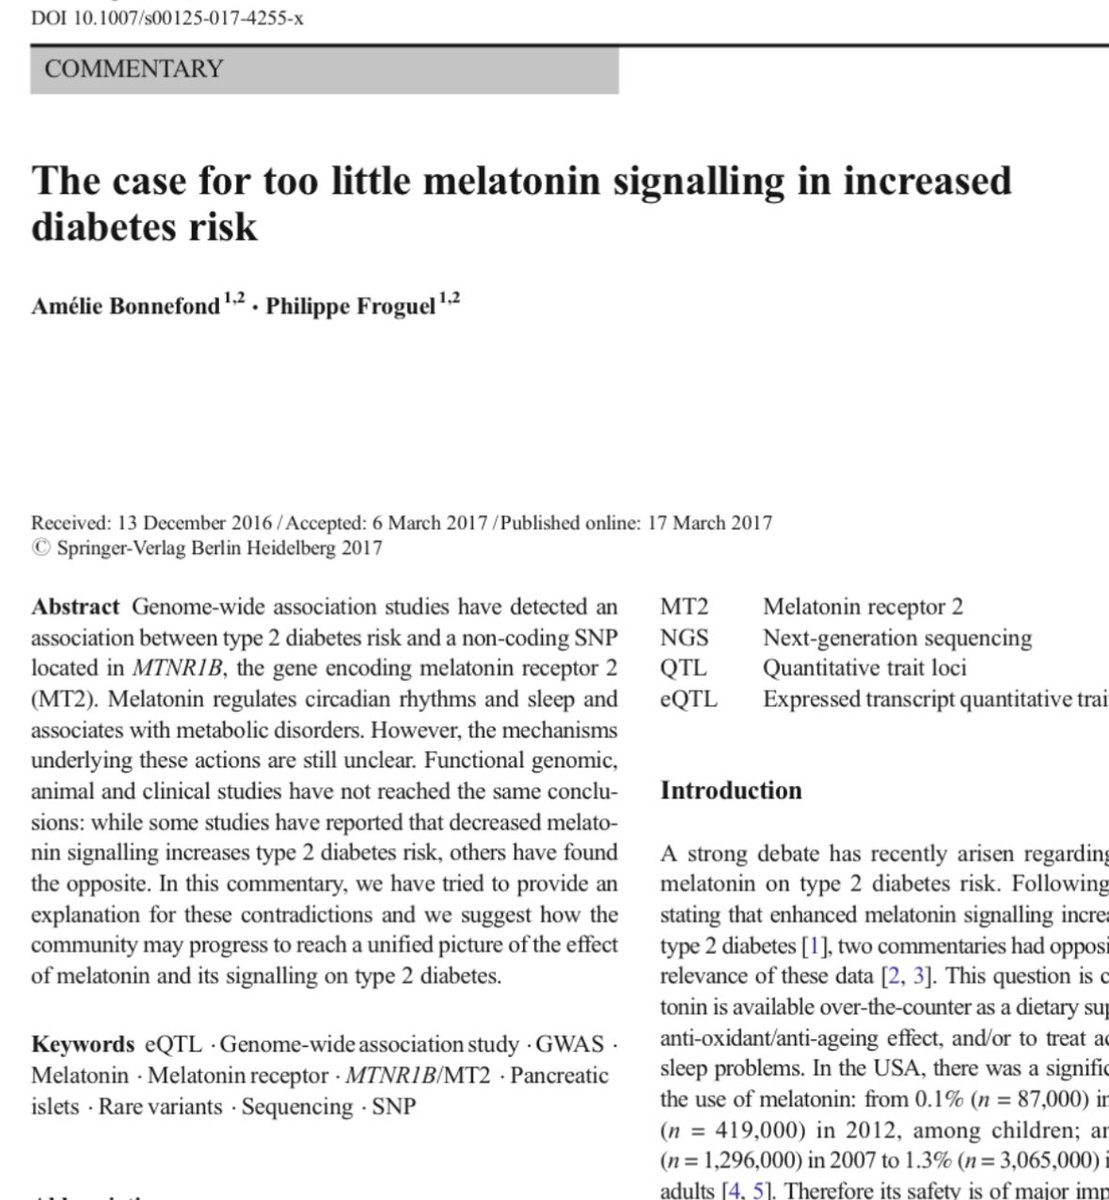 8 years ago we contributed to a strong scientific controversy in CellMetab and other journals on the impact of melatonin on diabetes and complications risk. From our and other data we denied Swedish colleagues claims that melatonin supplements could be harmful. This Lancet paper